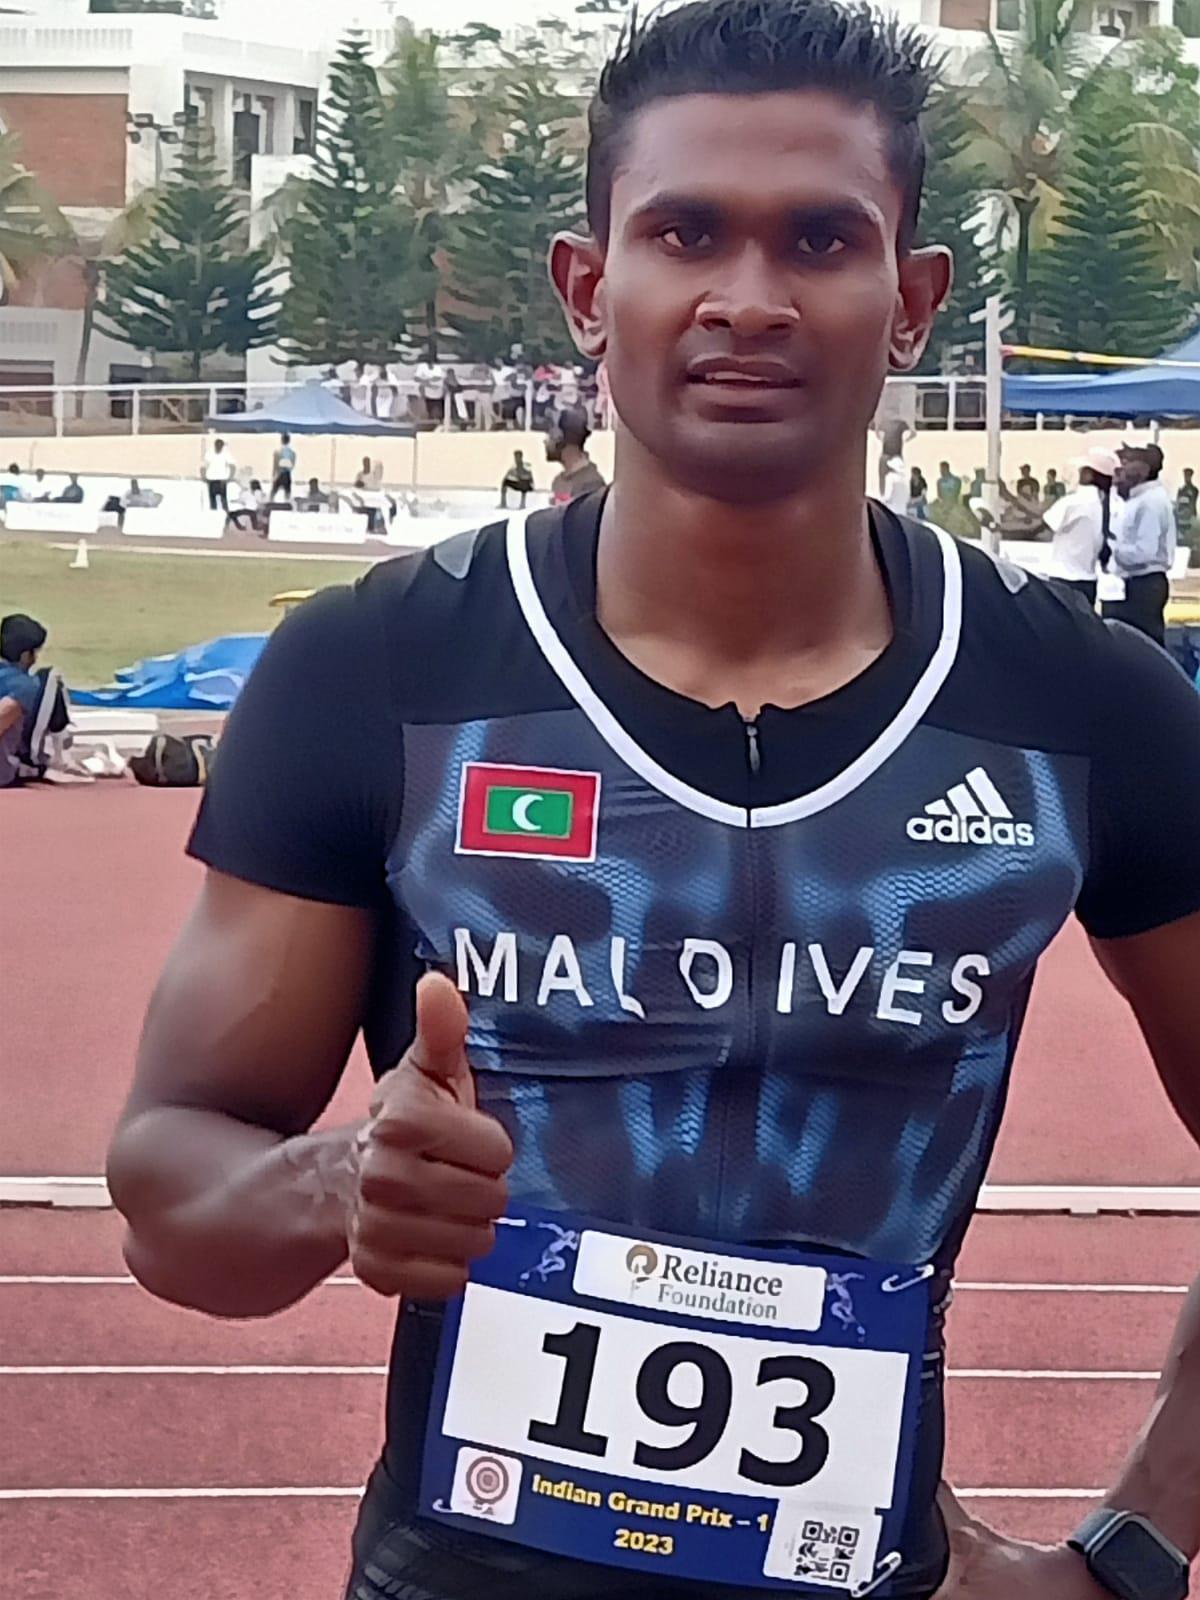 Hassan Saaid who won a sprint double in Indian Grand Prix-1 in Thiruvananthapuram